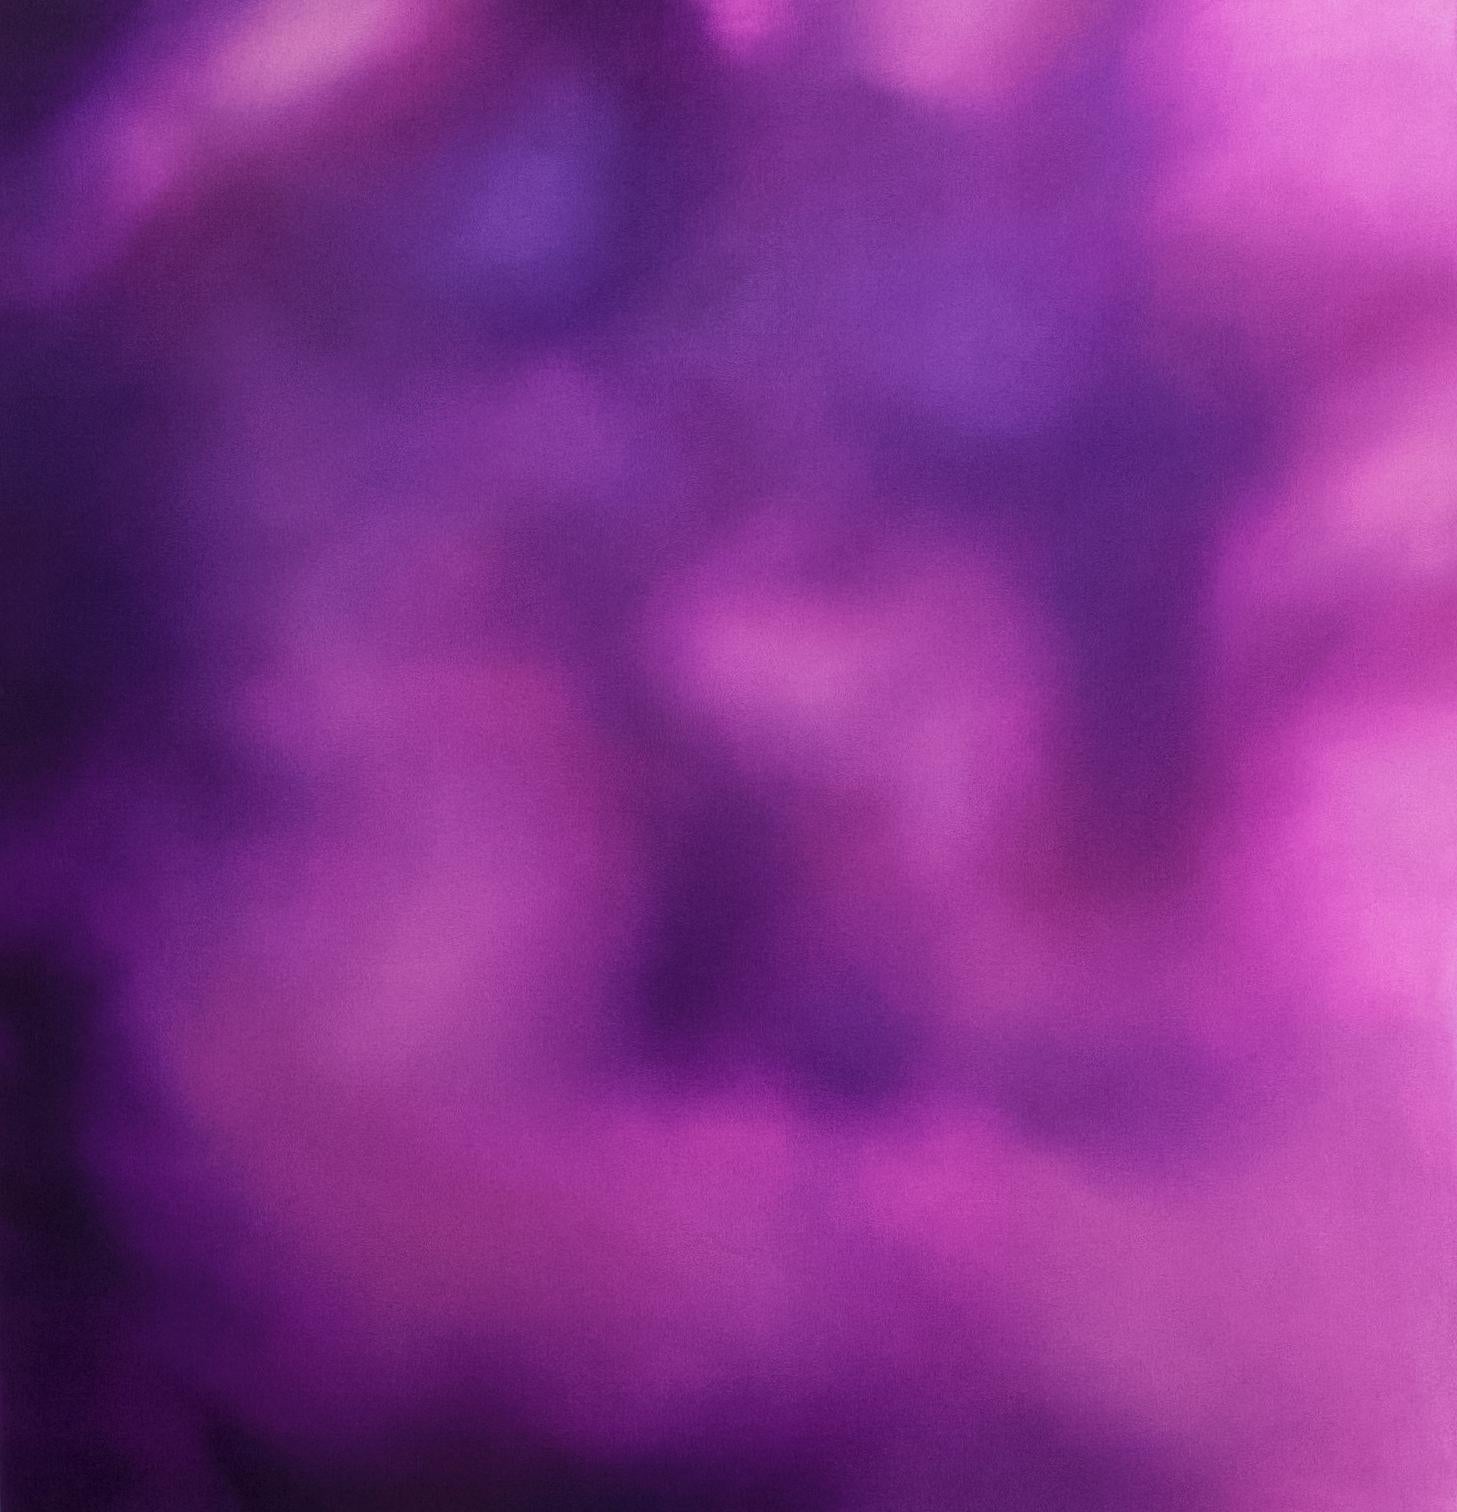 STORM - Purple nebulous oil painting on canvas - Extra-terrestrial - Sculpture by Kenzie Wells